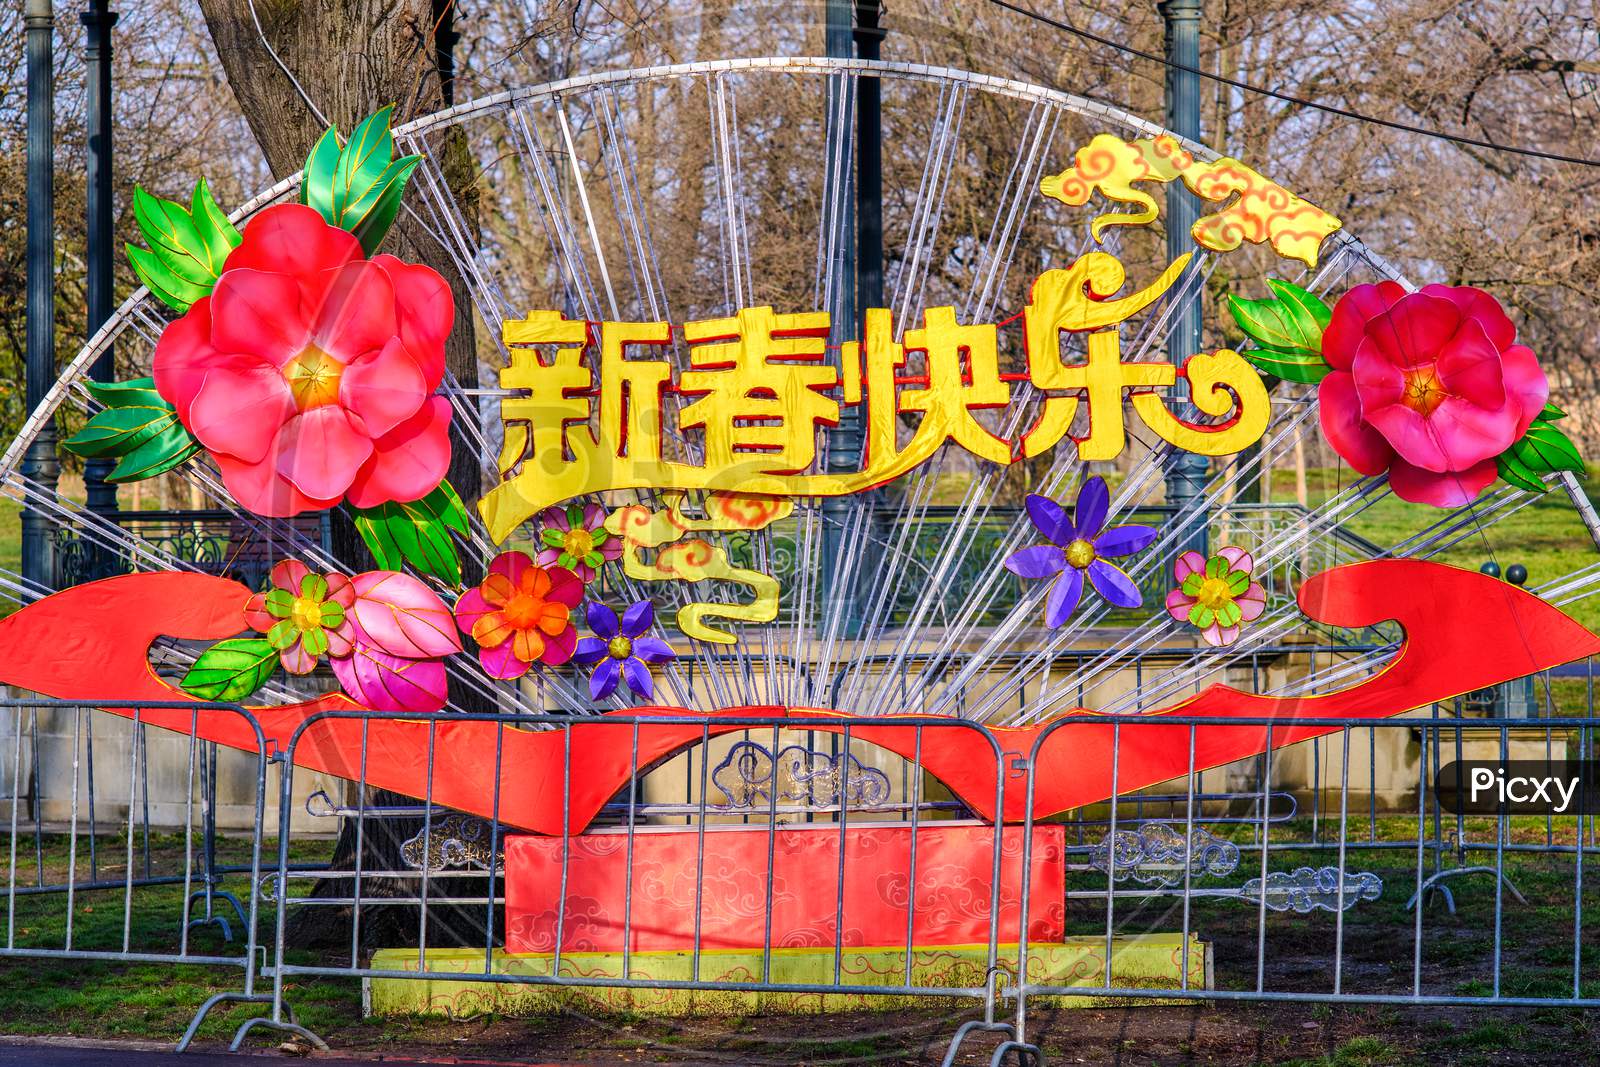 Chinese Lunar New Year Decorations In Belgrade Fortress Kalemegdan In Serbia